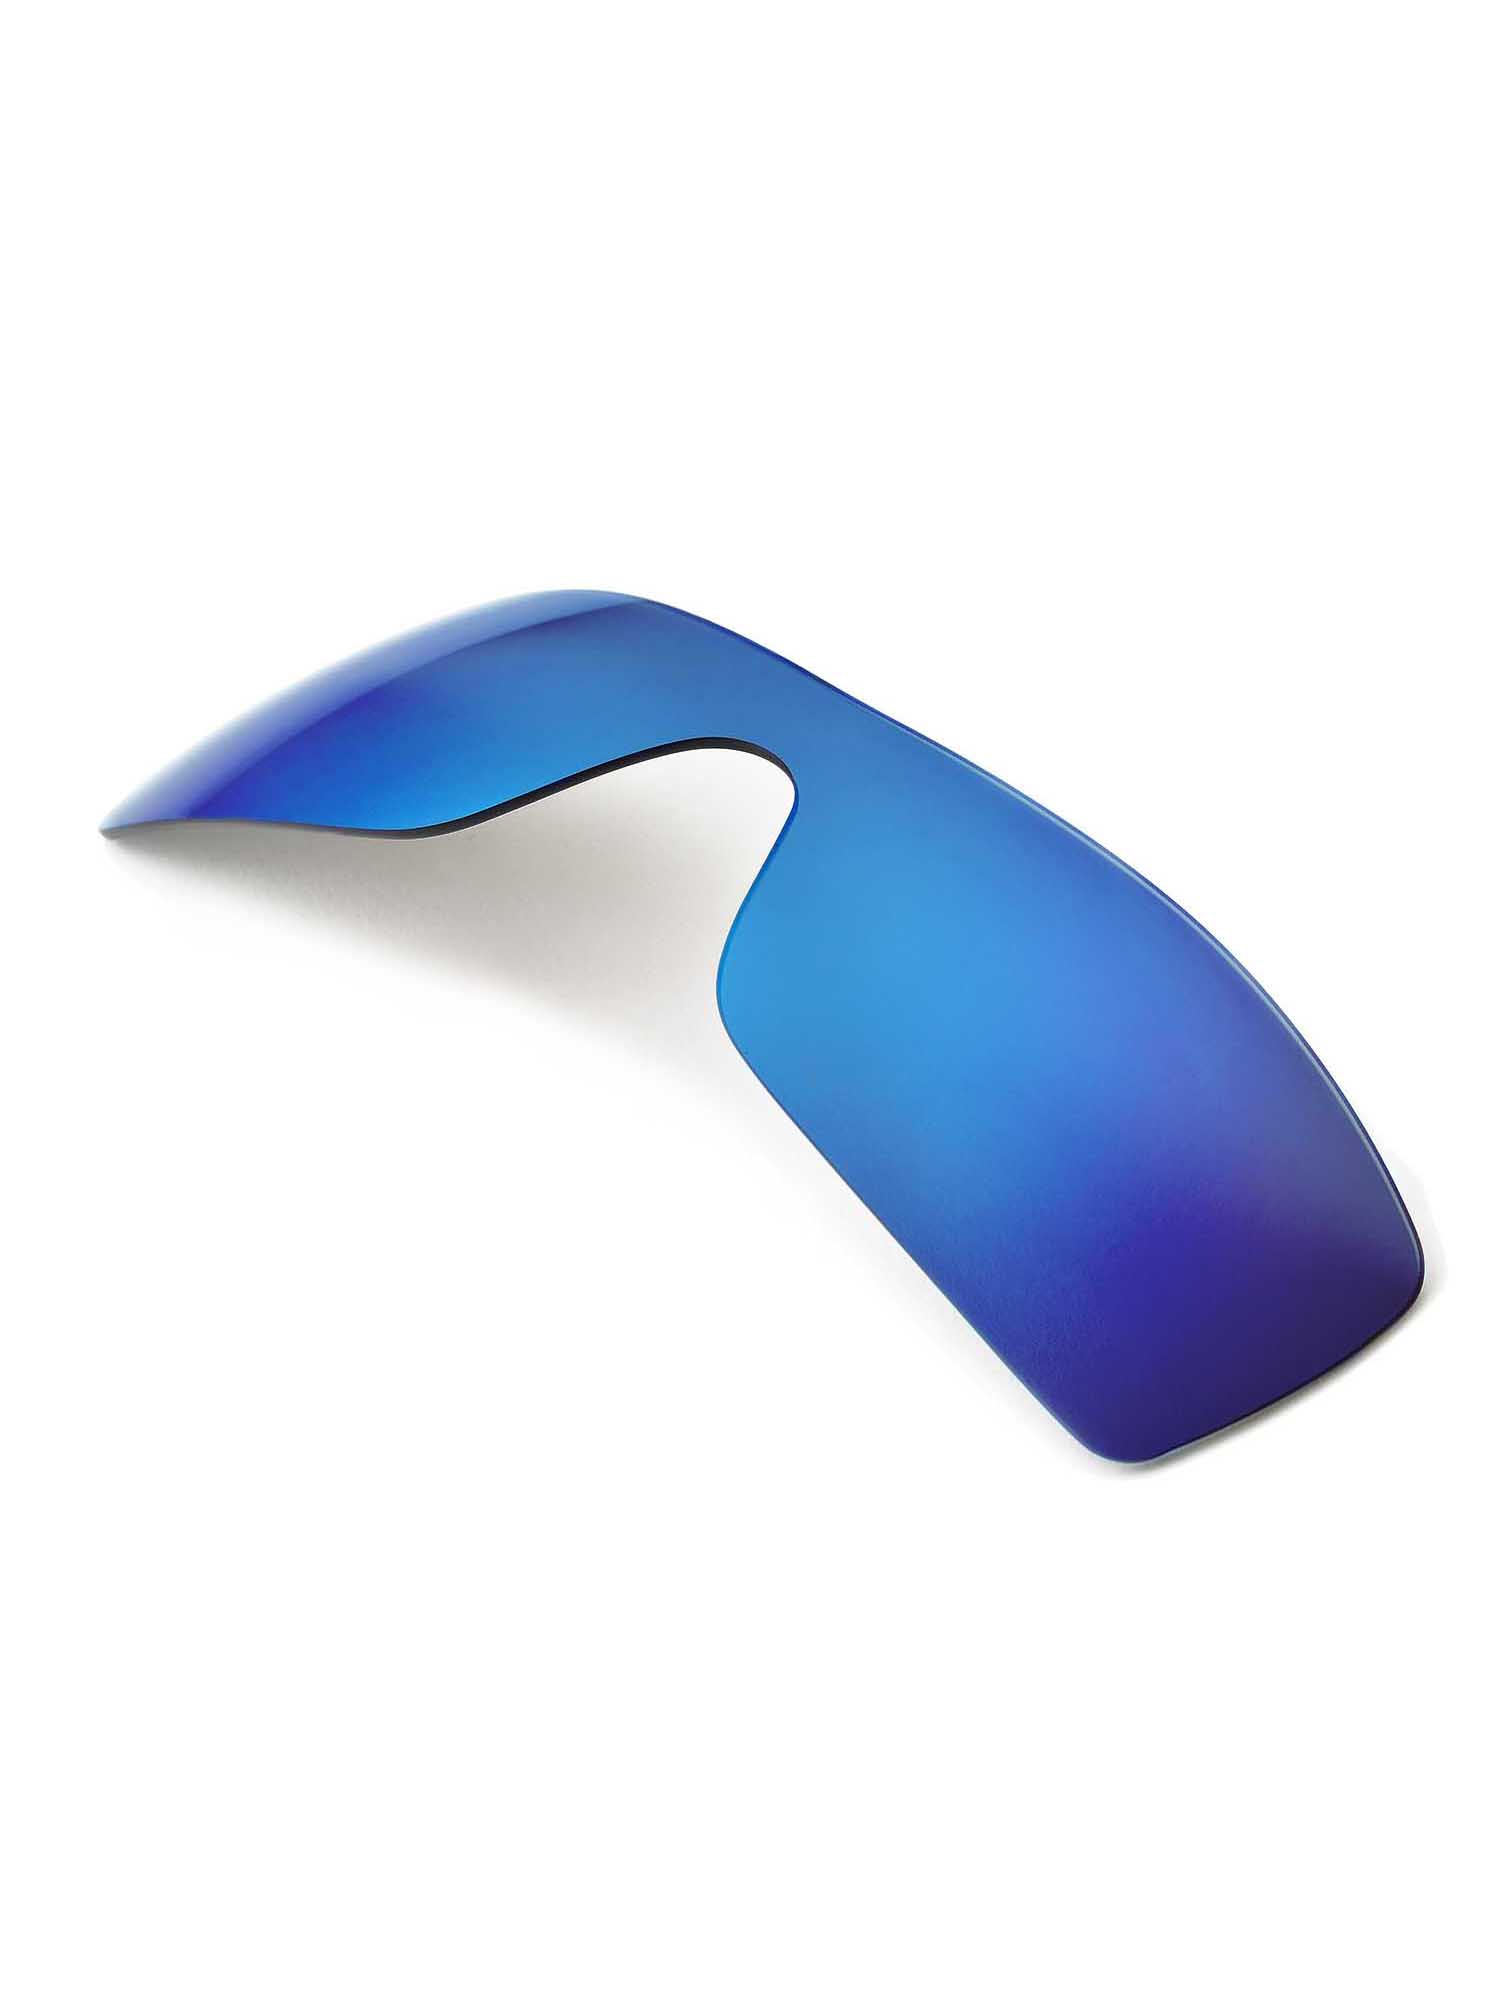 Walleva Ice Blue Polarized Replacement Lenses for Oakley Batwolf Sunglasses - image 3 of 7